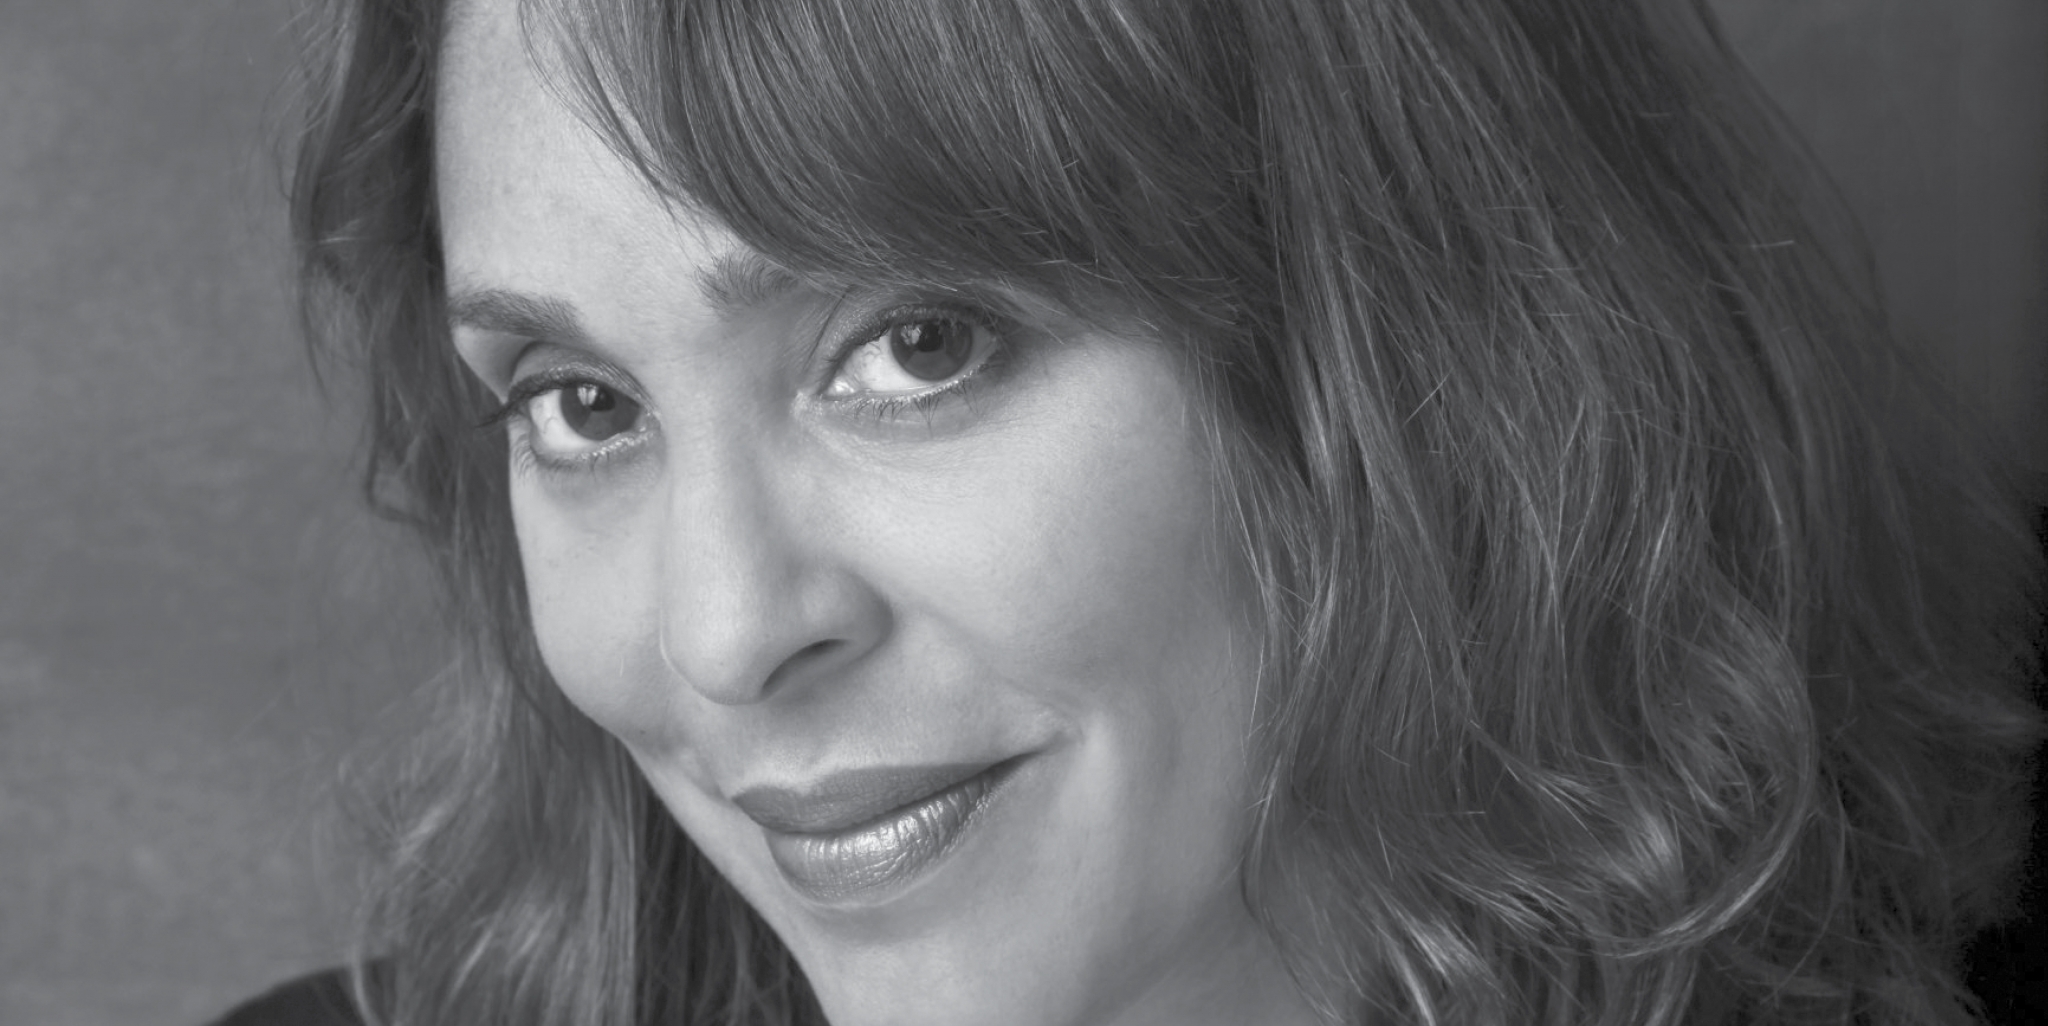 Prize Ceremony and Lecture by Natasha Tretheway